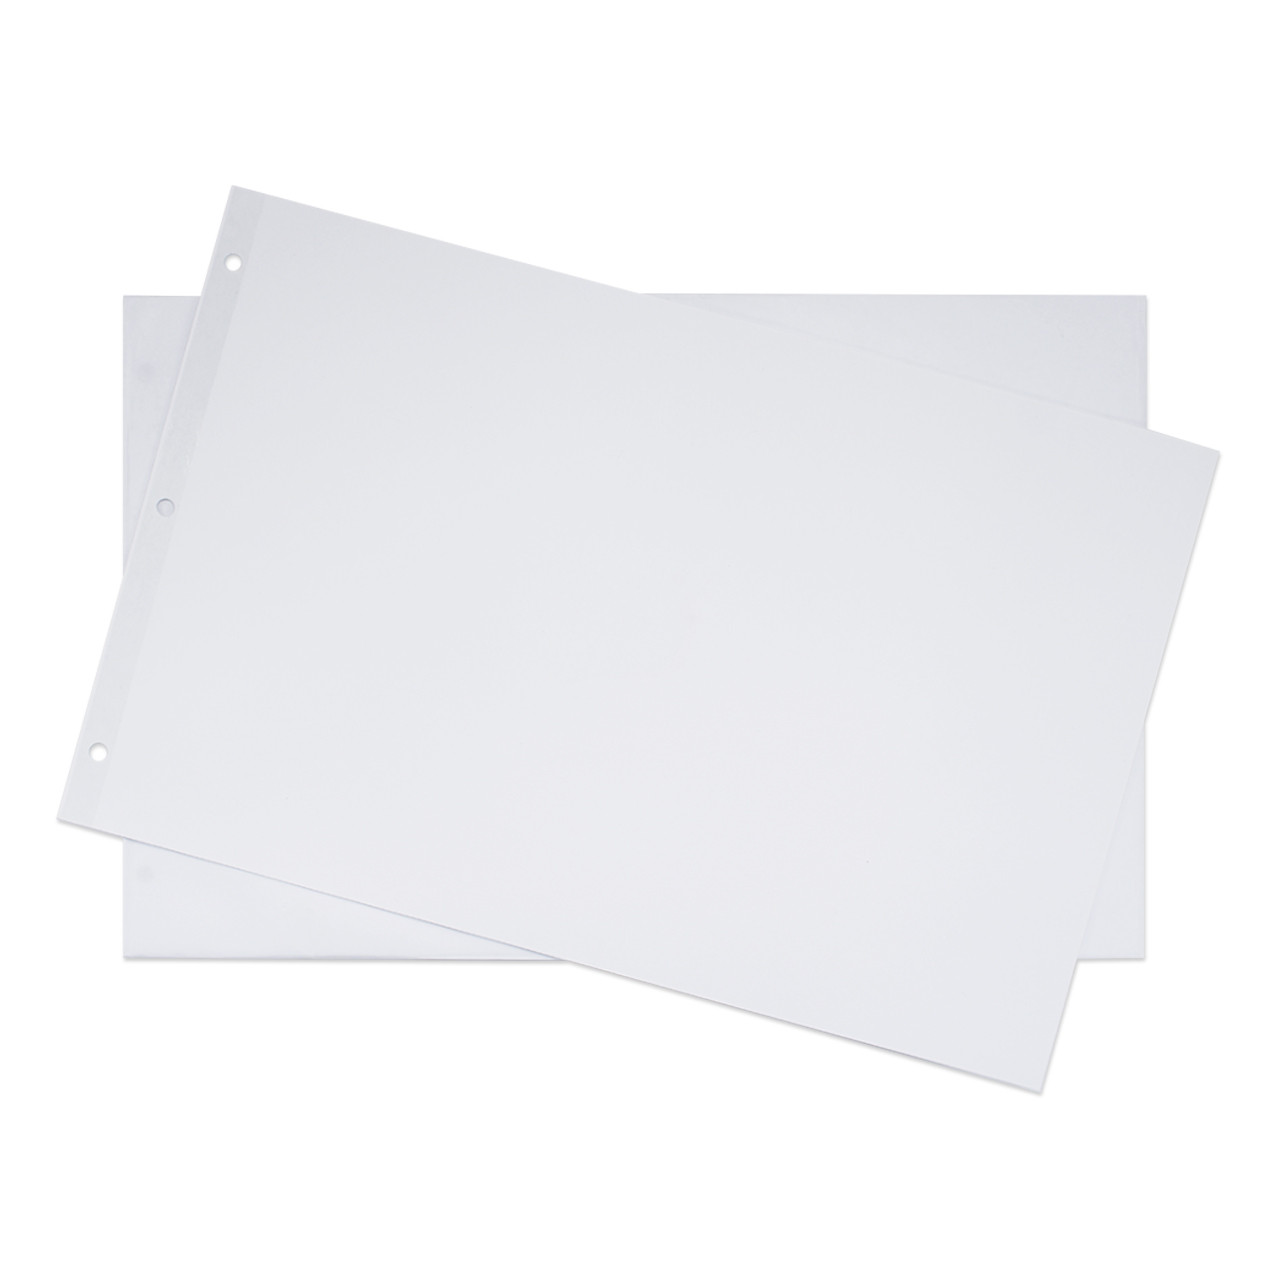 Perforated and Punched Paper, 7-Hole Punched, 20 lb Bond Weight, 8.5 x 11,  White, 500/Ream - TonerQuest